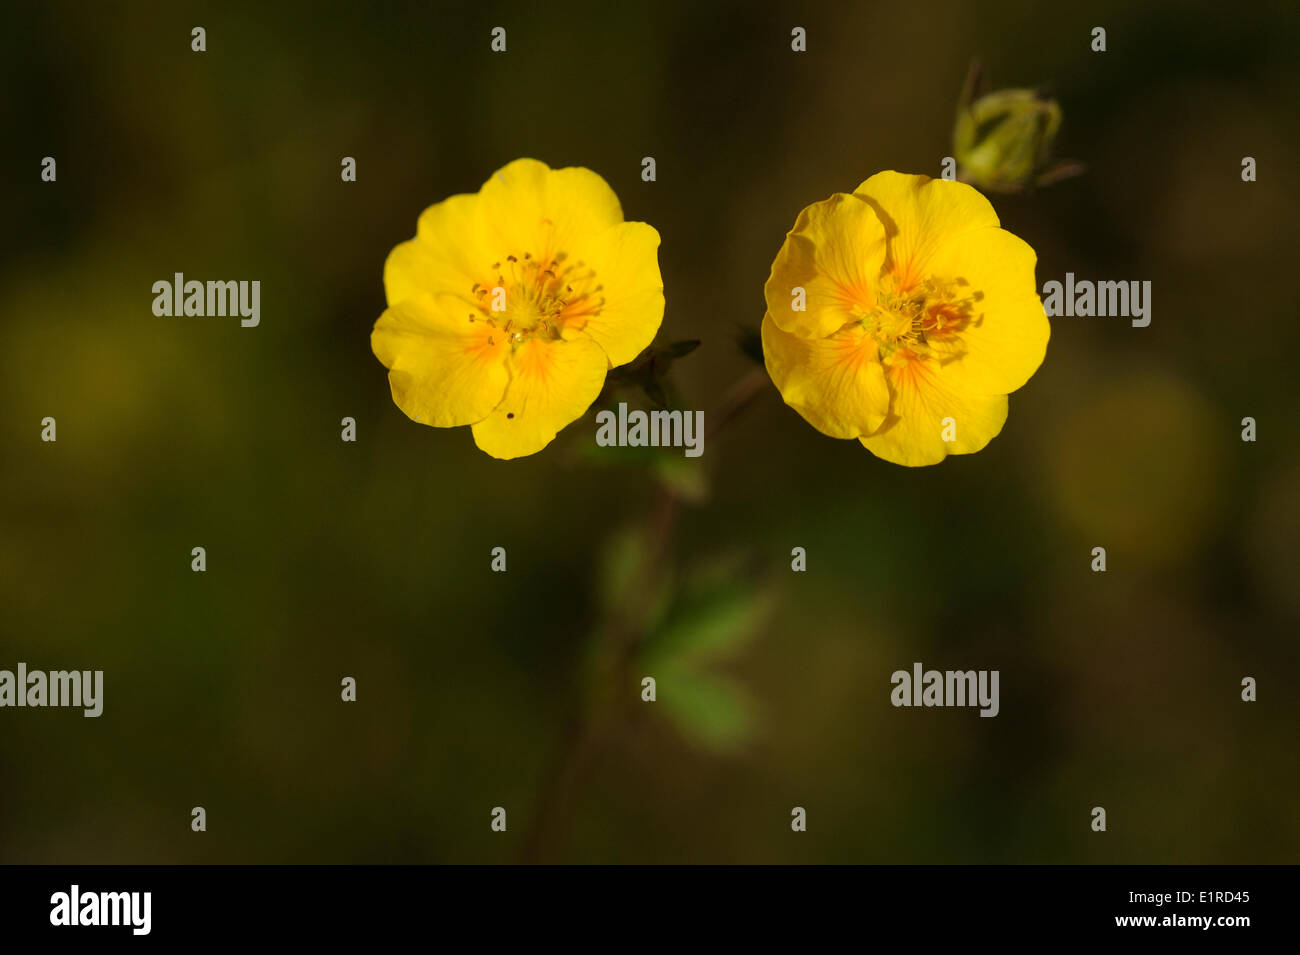 The flowers of the Dwarf Yellow Cinquefoil with the yellow petals with vague orange spots Stock Photo